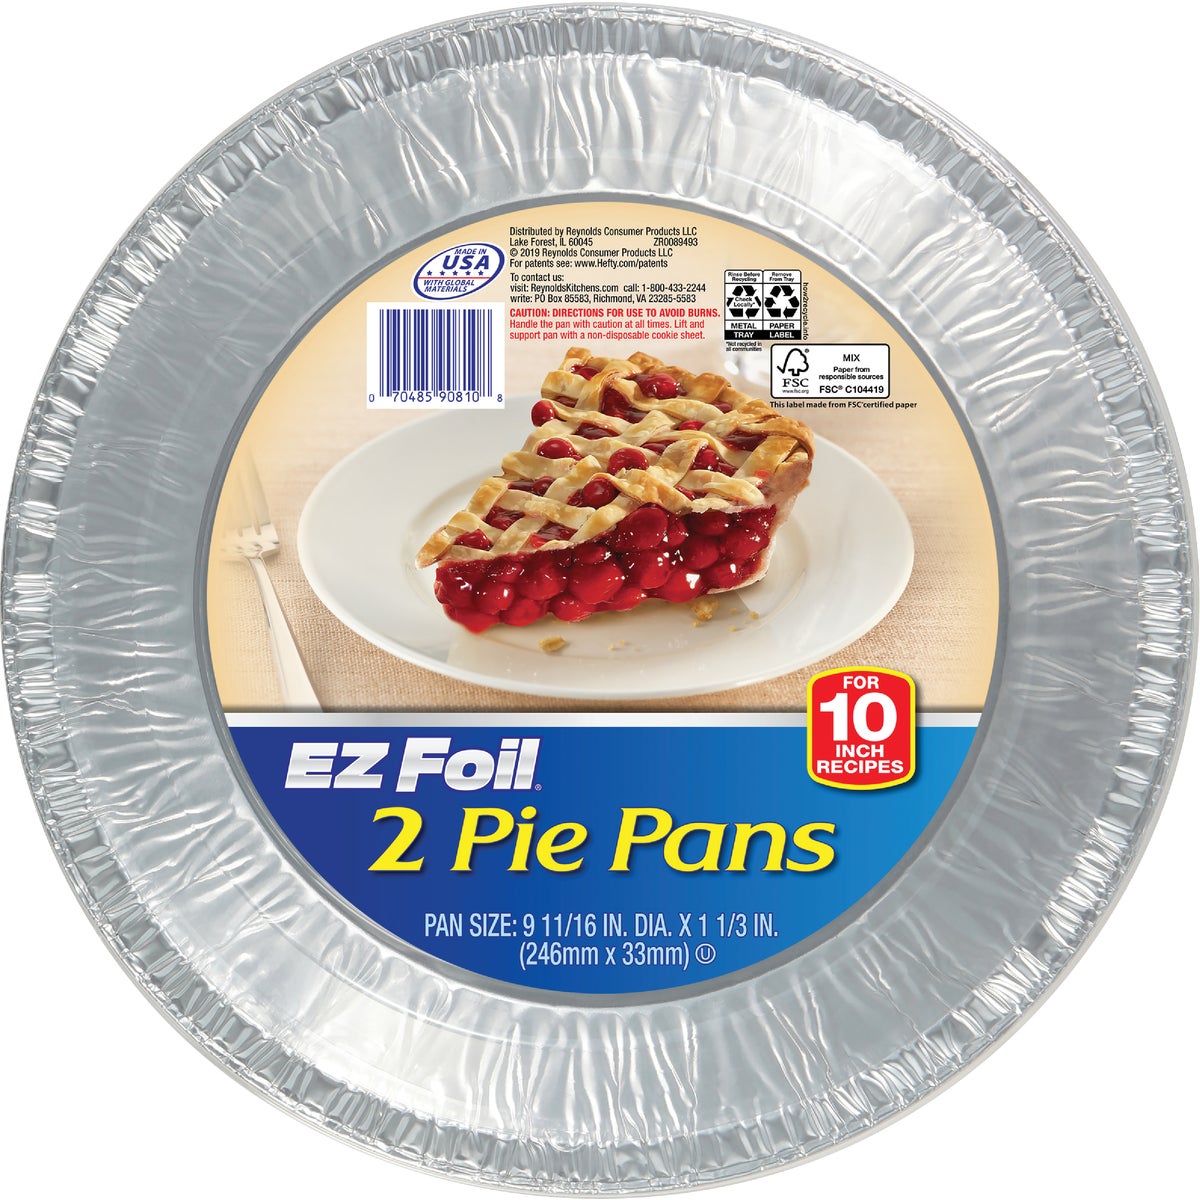 Item 600458, Extra large pie pans are ideal for 10 In. pie recipes.